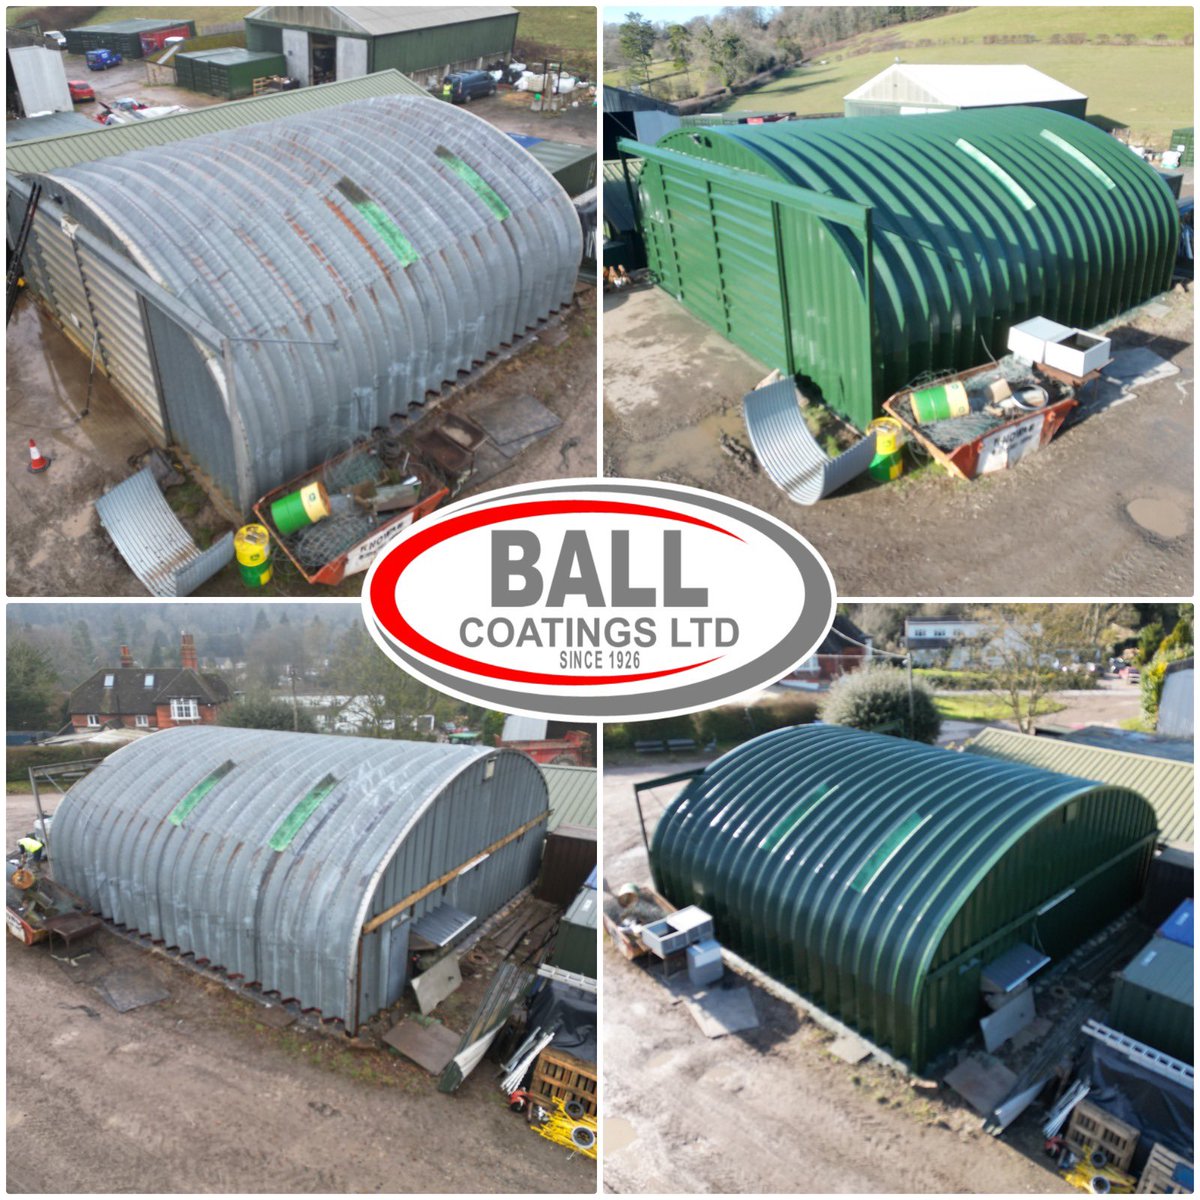 Here’s a recent project of ours where used our aqua washing system and re-coating a Quonset Hut in a nice bright olive green.

#quonset #olivegreen #paint #painting #coating #farm #farming #coating #ballcoatings #quonsethut #recoating #farmbuildings #commercial